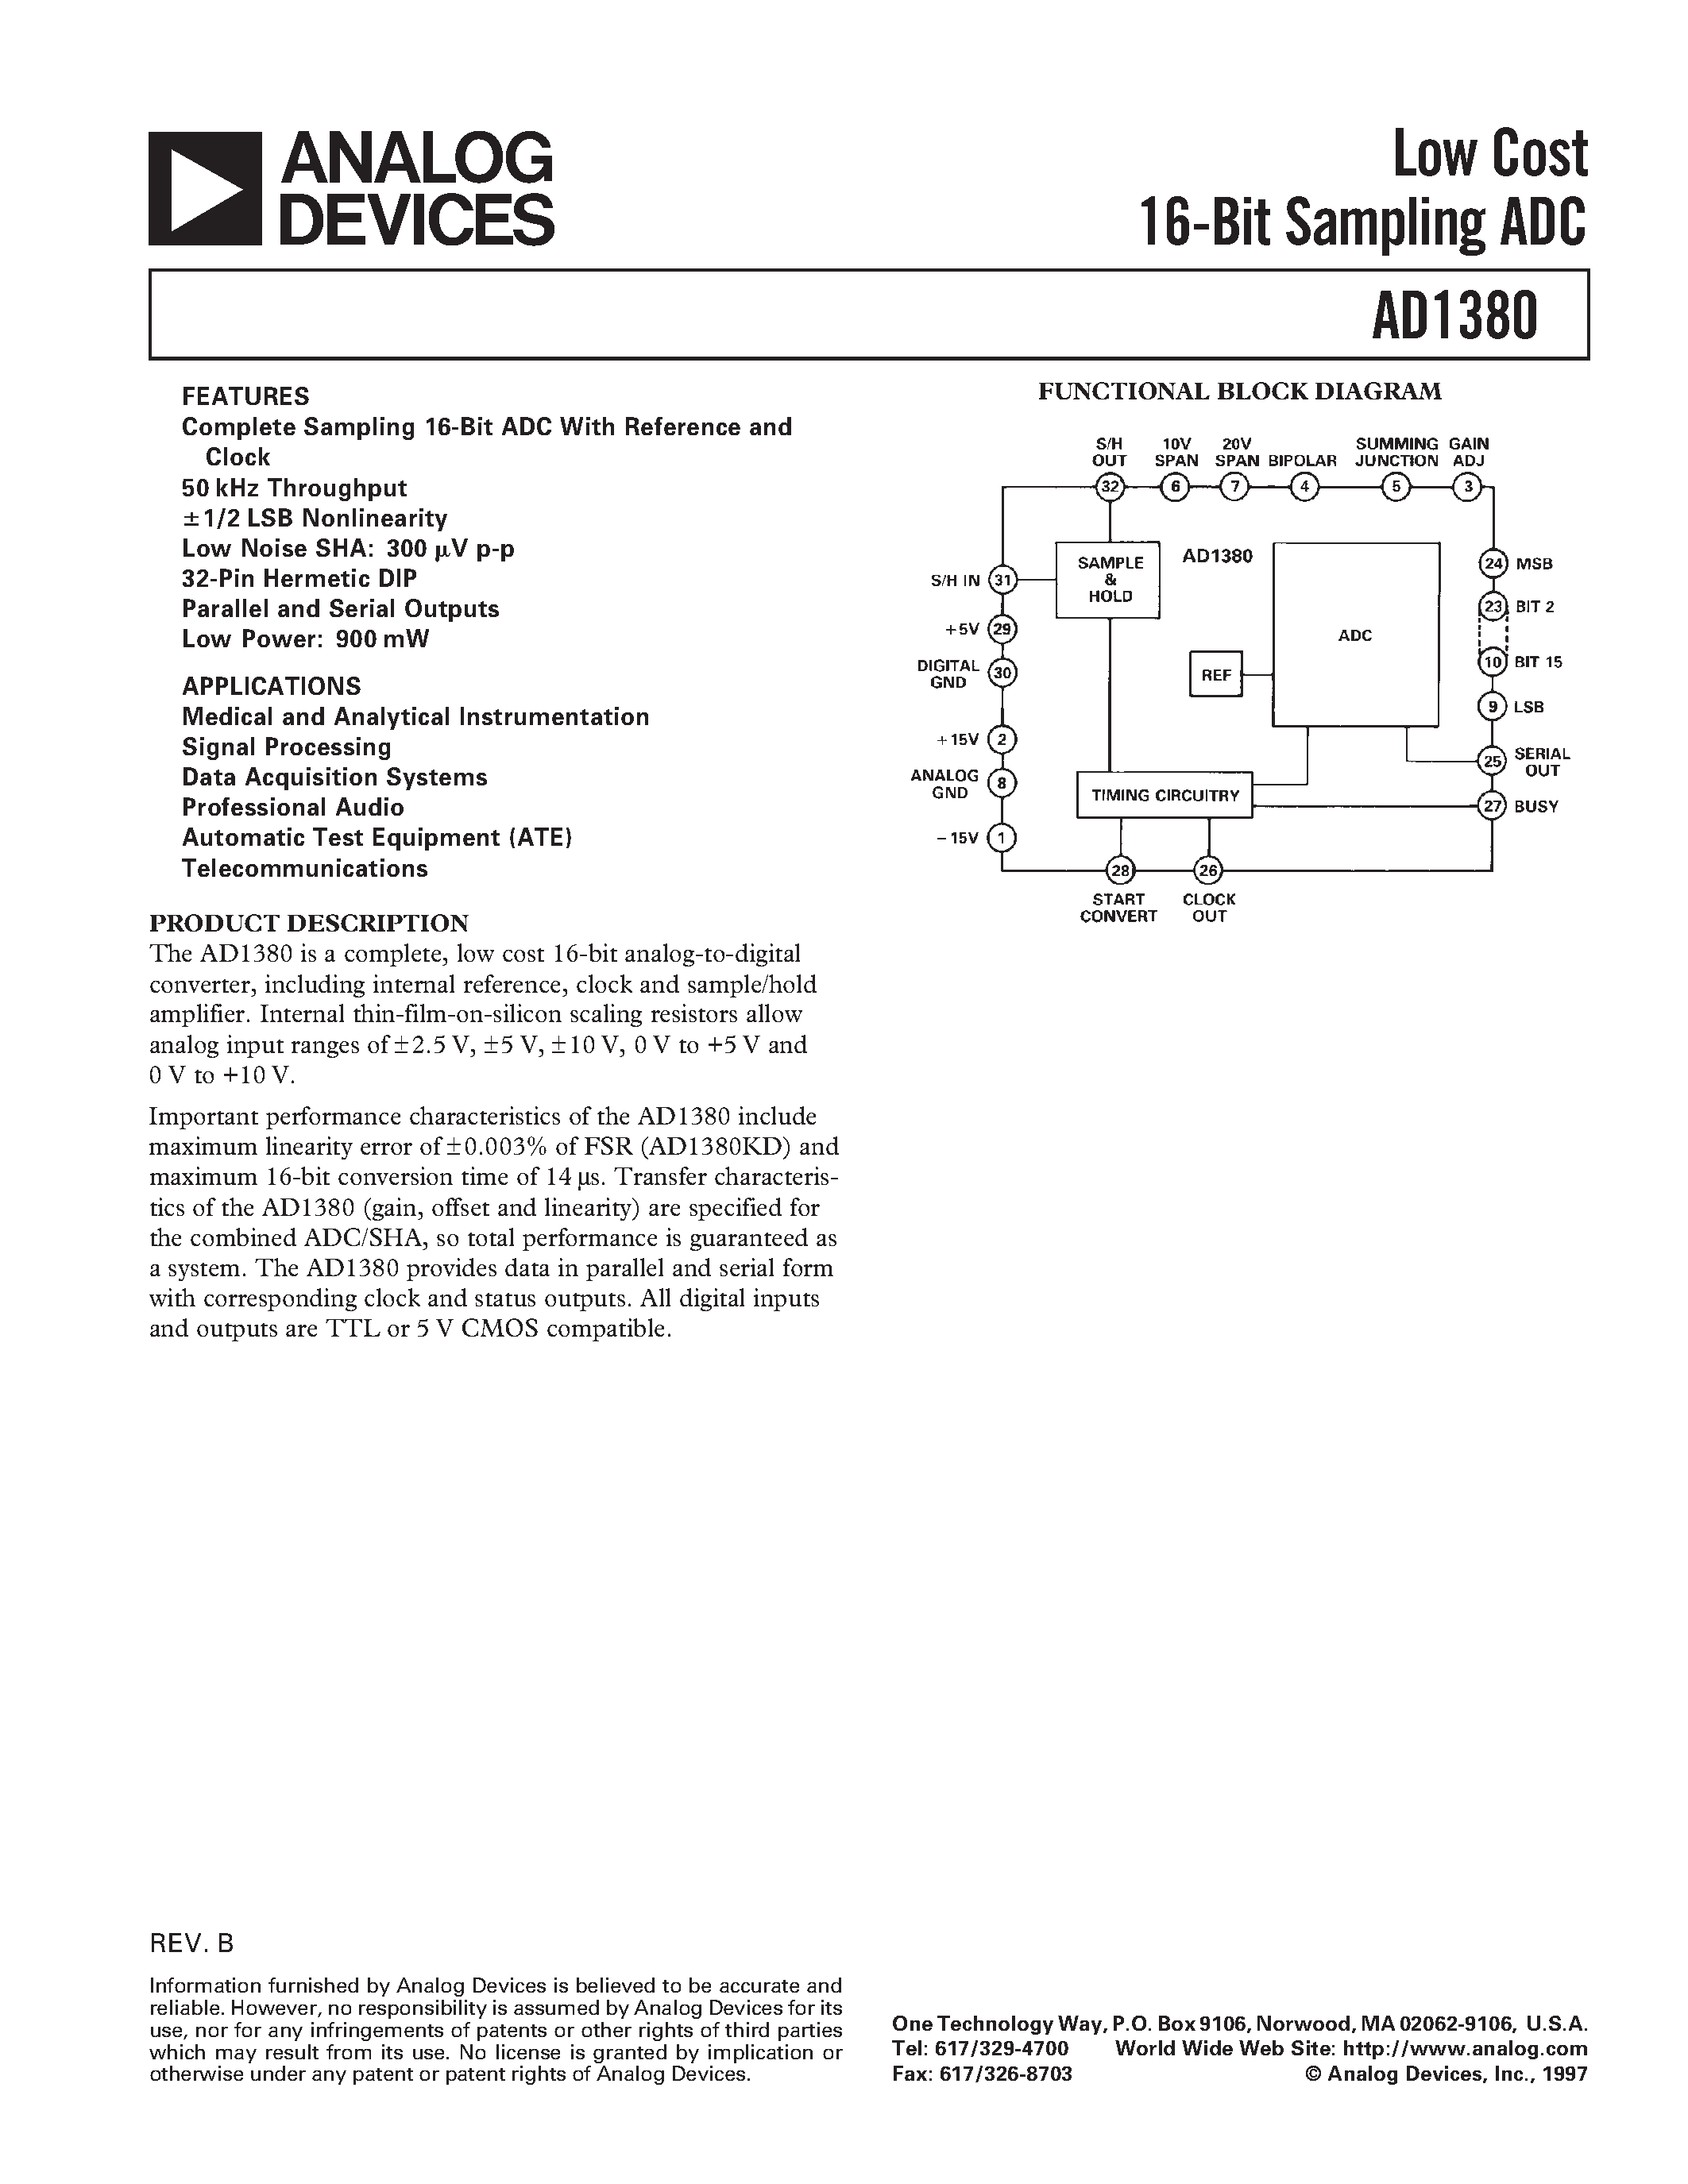 Datasheet AD1380KD - Low Cost 16-Bit Sampling ADC page 1